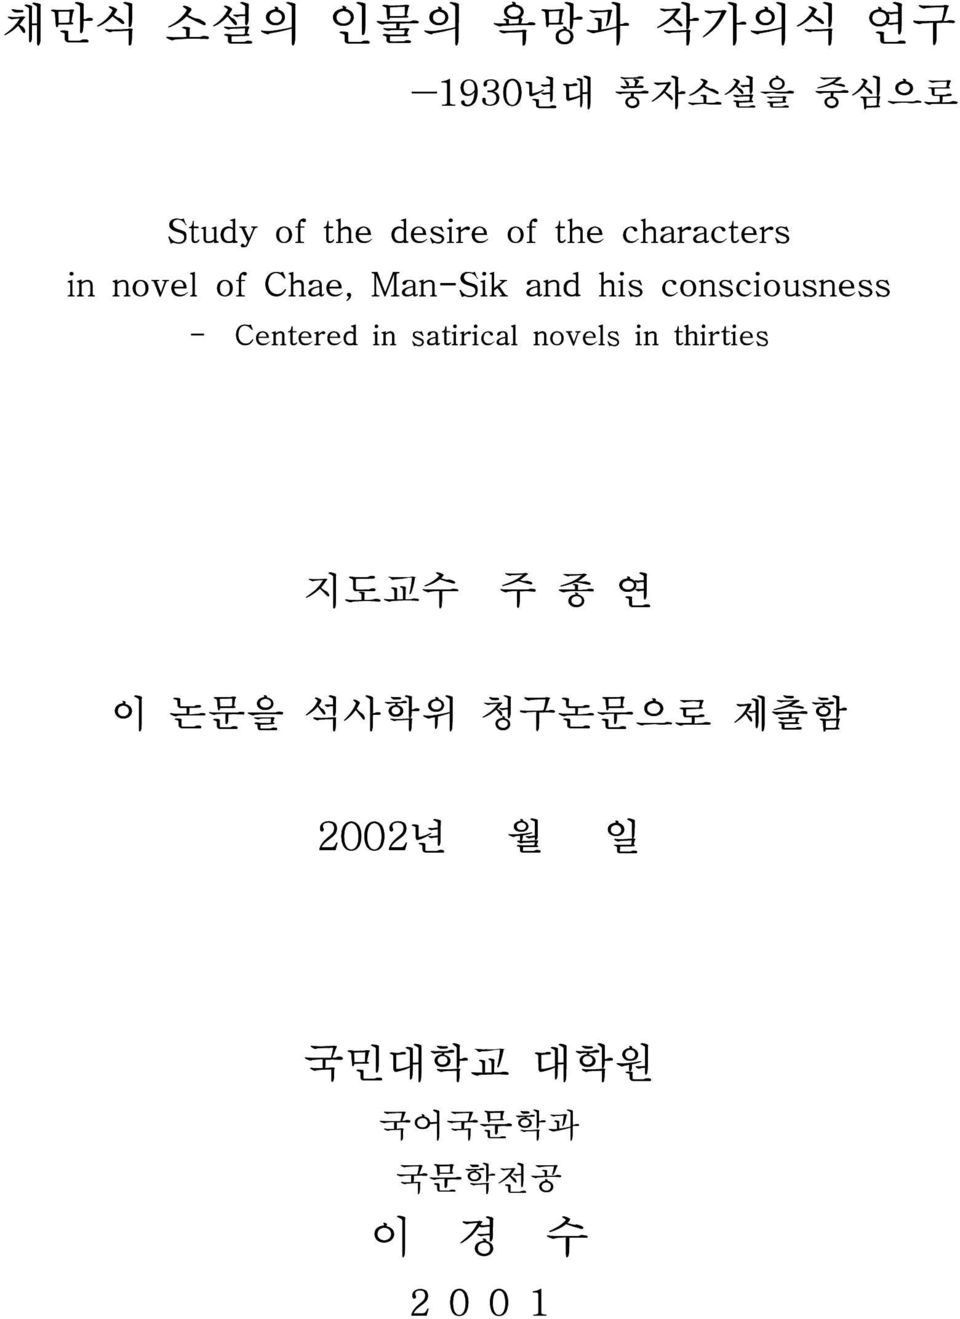 consciousness - Centered in satirical novels in thirties 지도교수